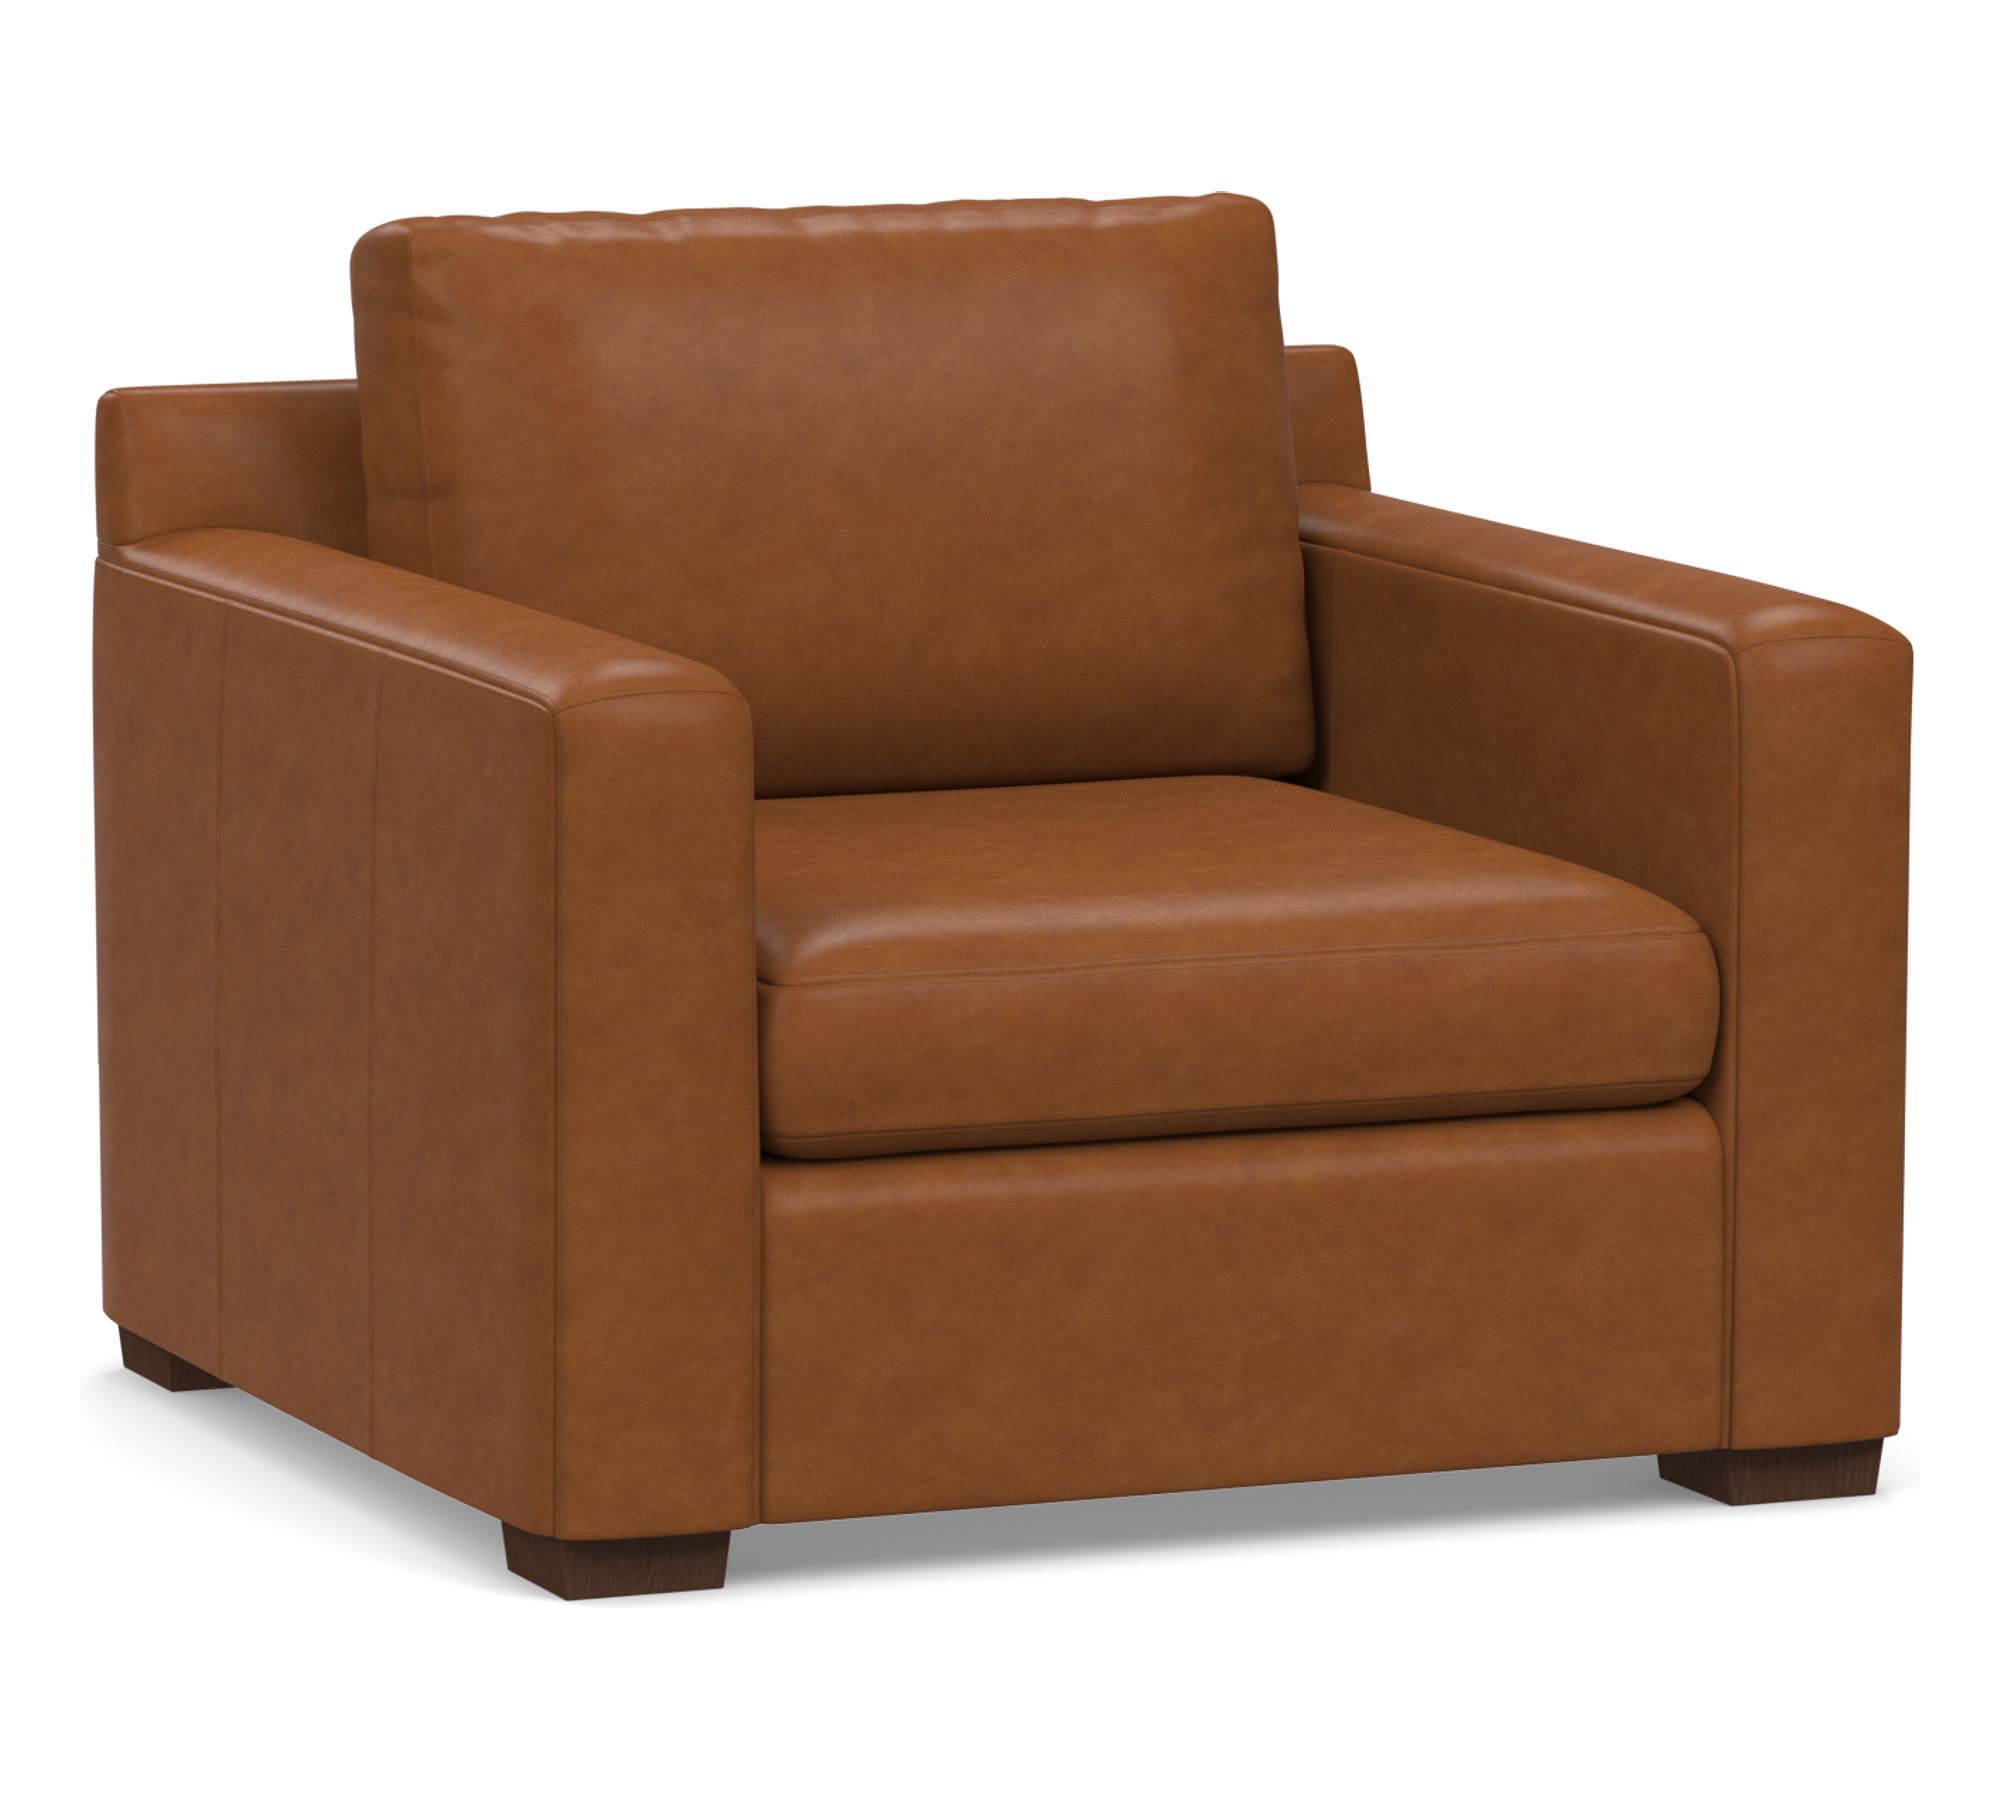 Shasta Square Arm Leather Chair